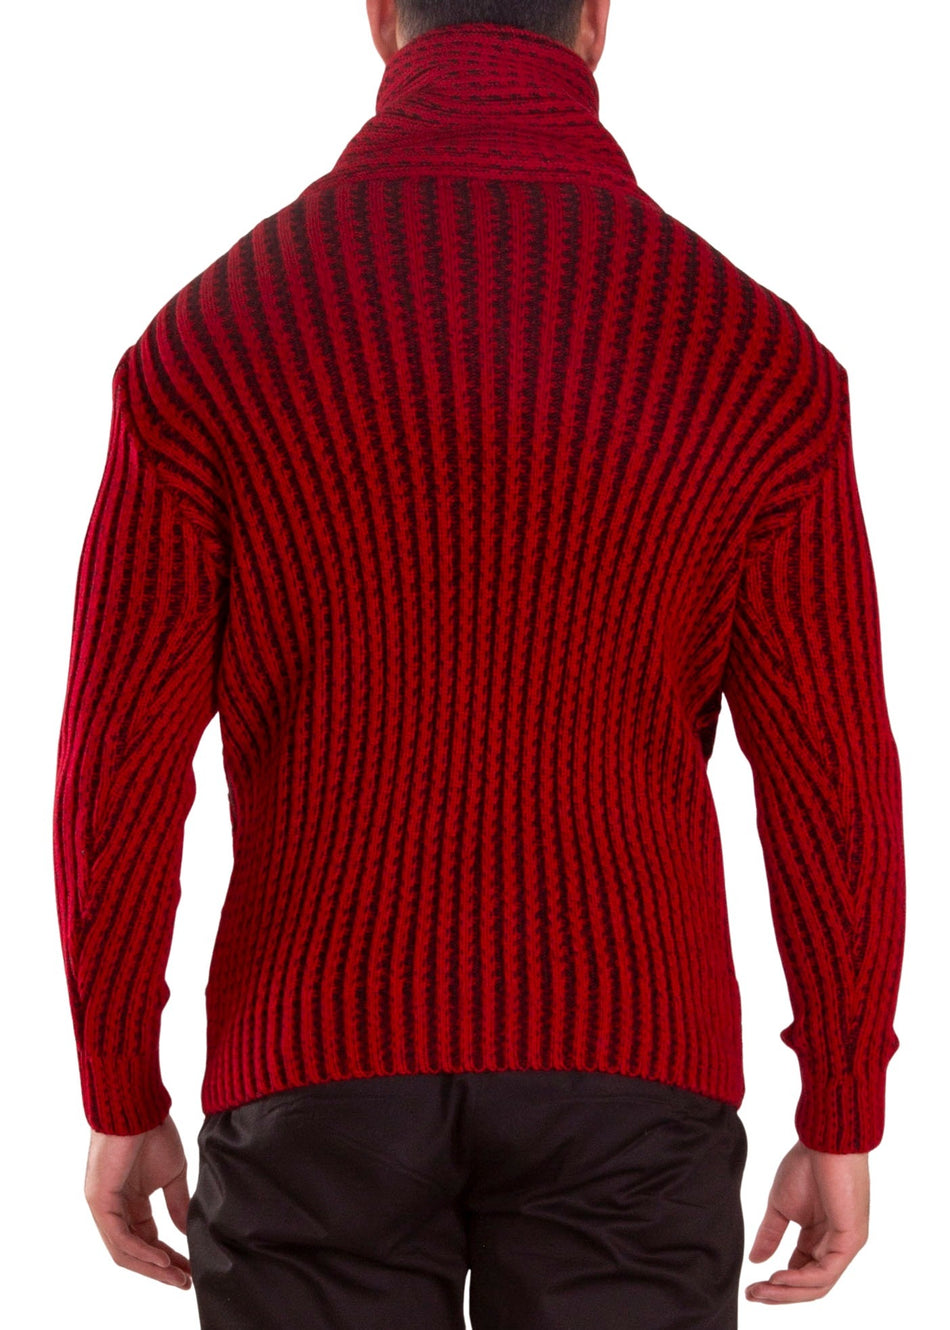 235133 - Red Pullover Sweater